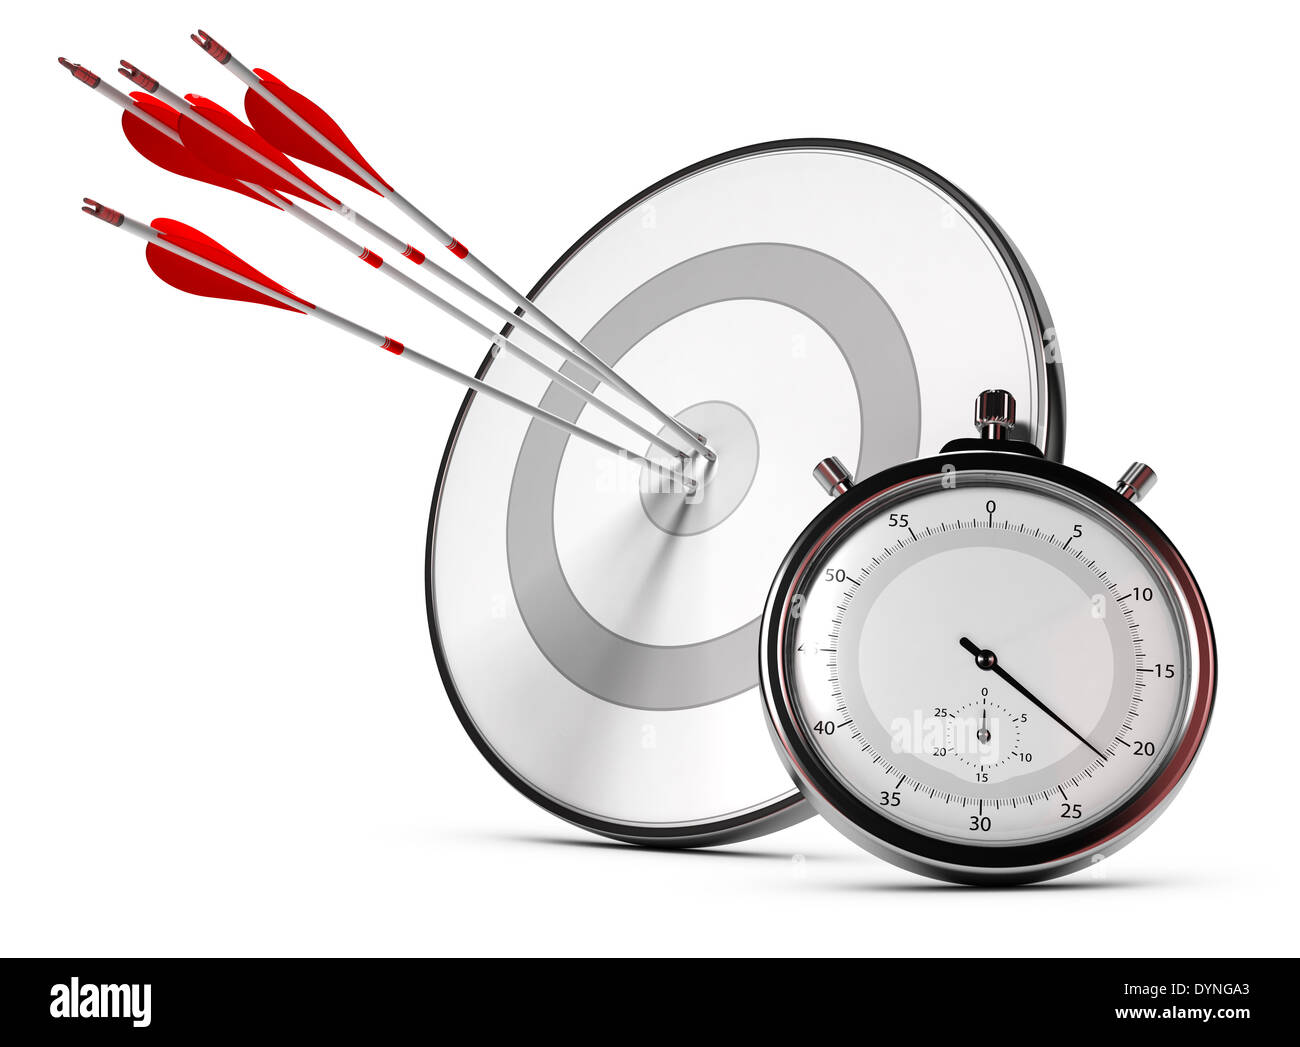 Four arrows hitting the center of a grey target plus a stopwatch, Illustration of SMART objectives or measurable goals. Stock Photo